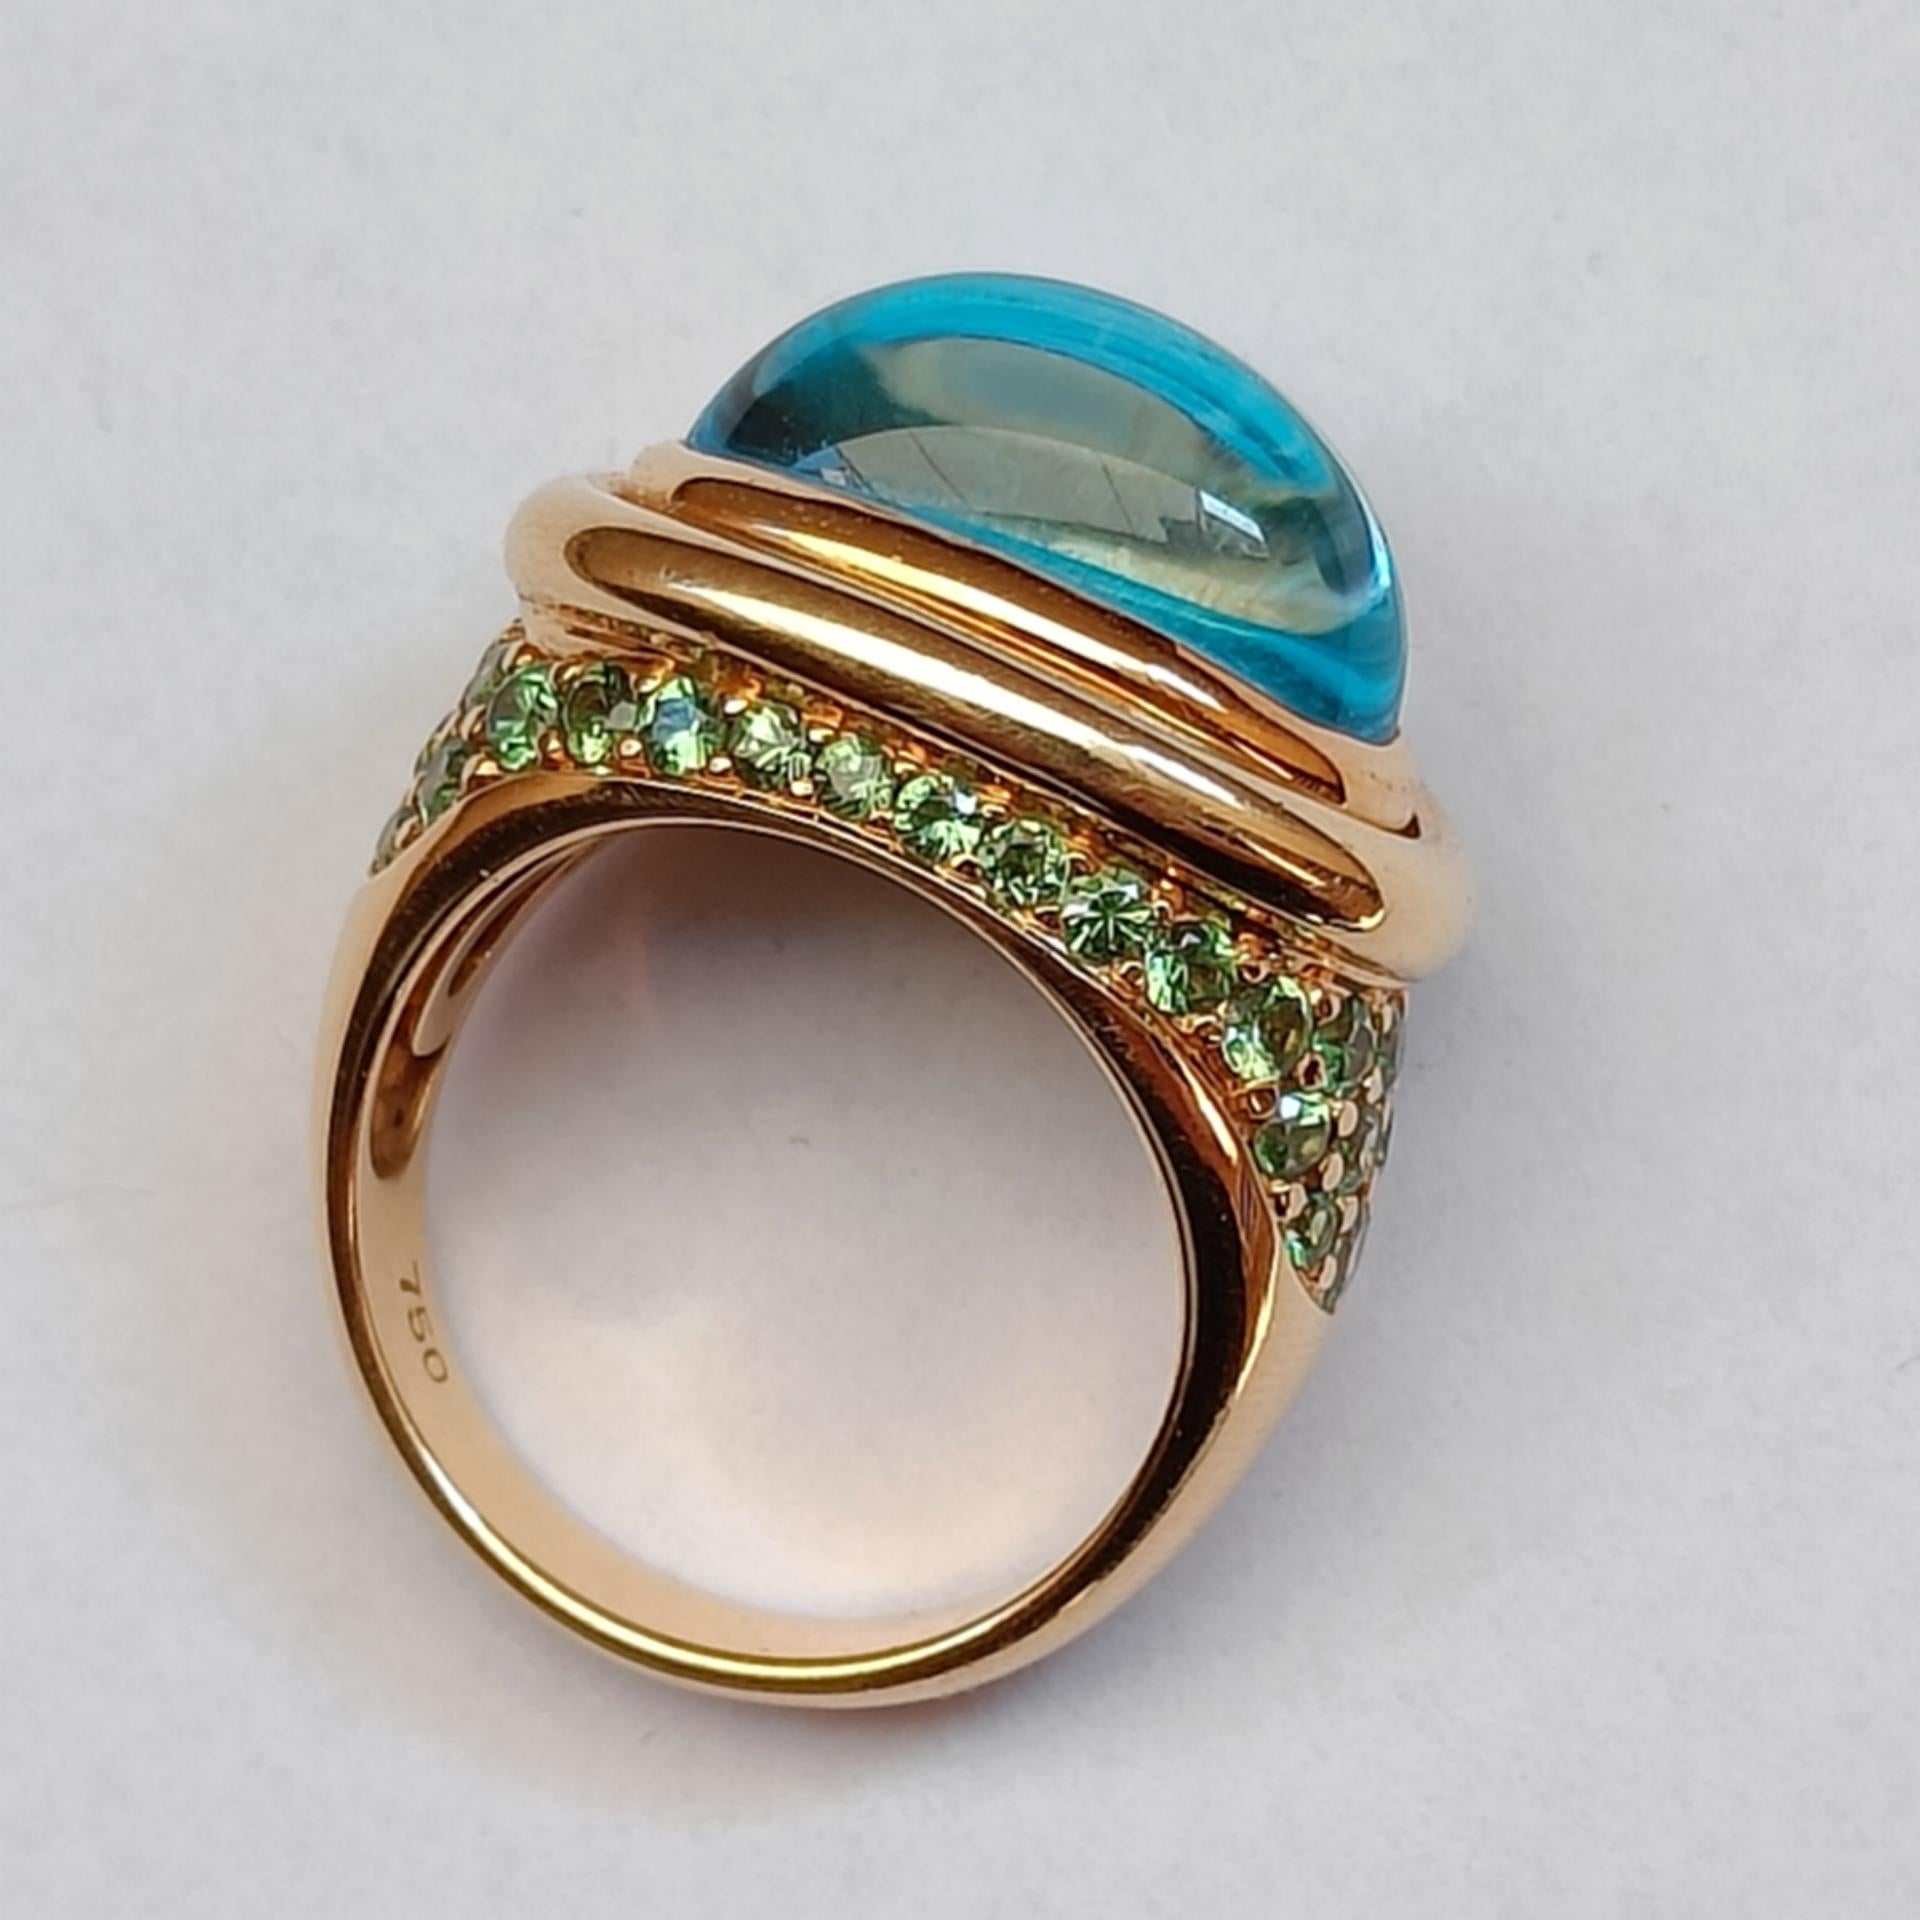 A large 18k yellow gold ring adorned with a blue topaz oval cabochon surrounded by a pavé of tsavorites (green garnets)

Stamped 750. There is another stamp on the external shank of the ring, but it's very small and I couldn't identify it.

Size: FR